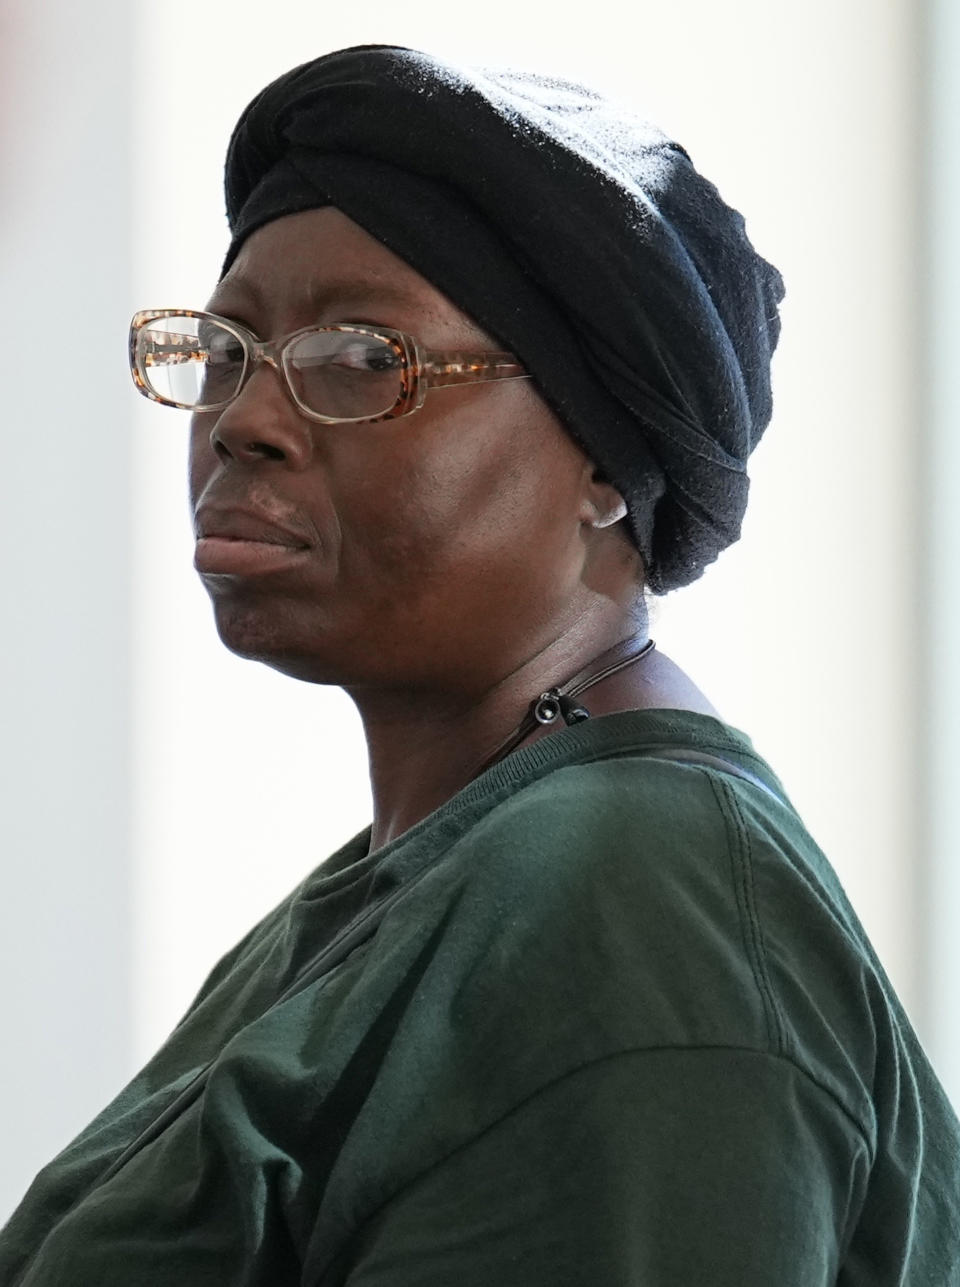 Sheneen McClain, mother of Elijah McClain, looks on outside the courtroom at the Adams County Justice Center for the start of a trial of two of the police officers charged in the death of McClain, Wednesday, Sept. 20, 2023, in Brighton, Colo. (AP Photo/Jack Dempsey)